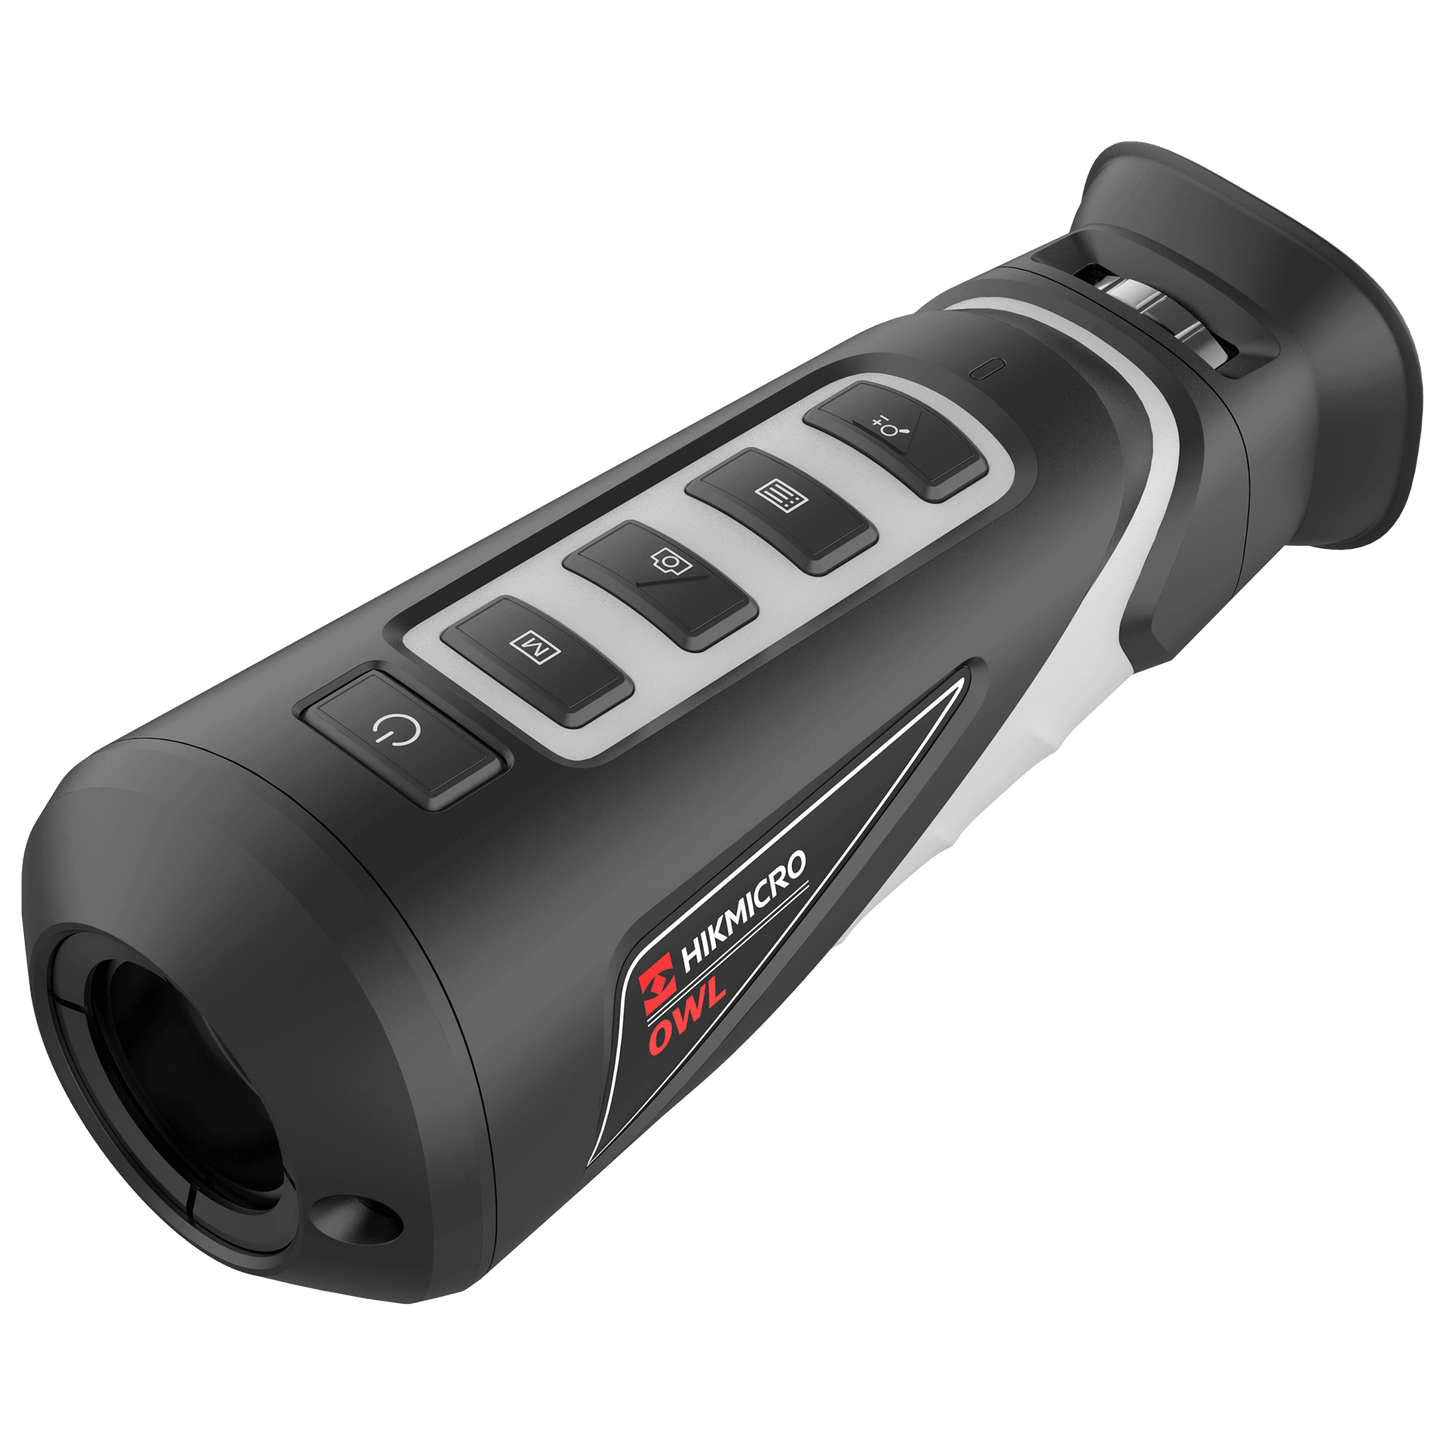 Cape Thermal - The best thermal imaging monoculars for sale - HikMicro OWL OH25 Handheld thermal imaging monocular - Left Side View